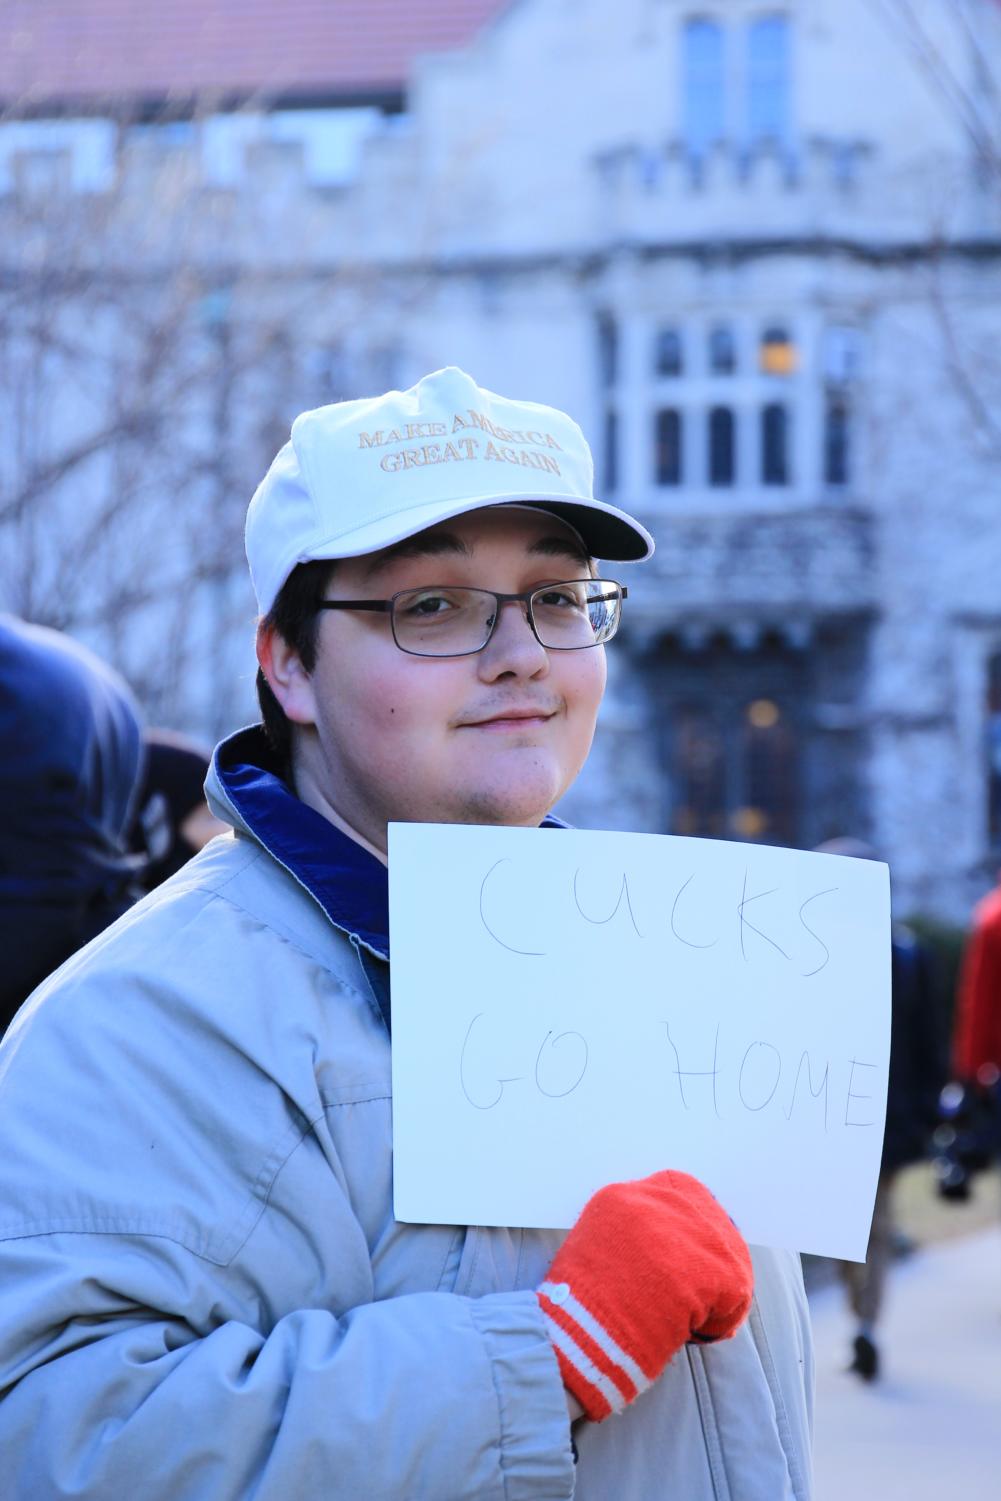 A sole counter-protester, second-year Paul Alves, wore a “Make America Great Again” cap. He stood in front of the Quadrangle Club and waved a sign that said “Cucks go home” at the protesters across the street.